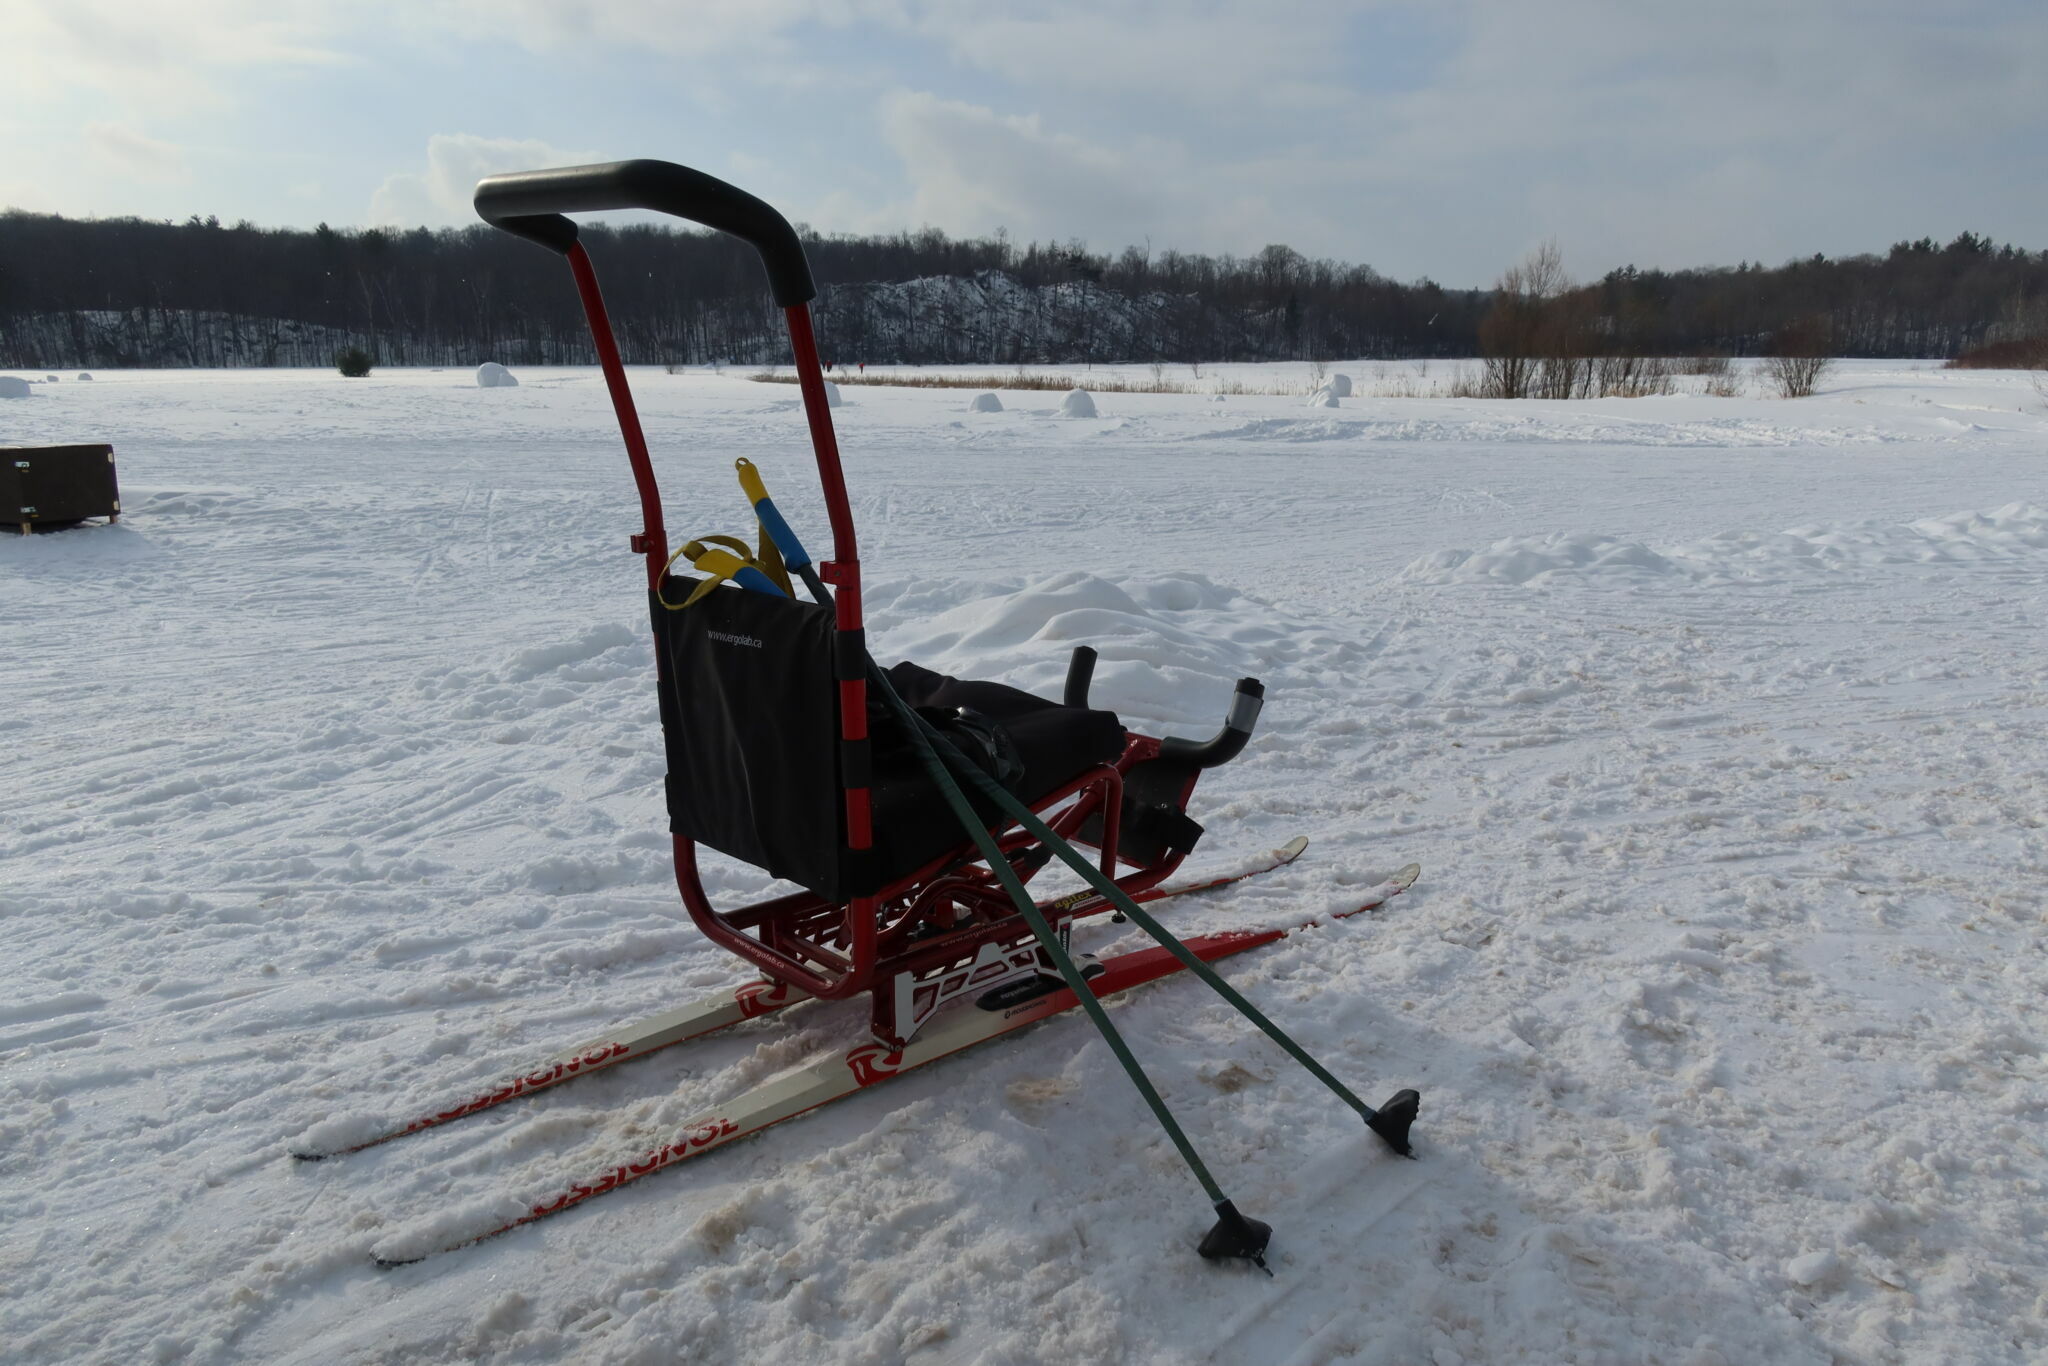 Adaptive cross-country ski sledge for persons with reduced mobility, available for rent, by reservation, at the Relais plein air.